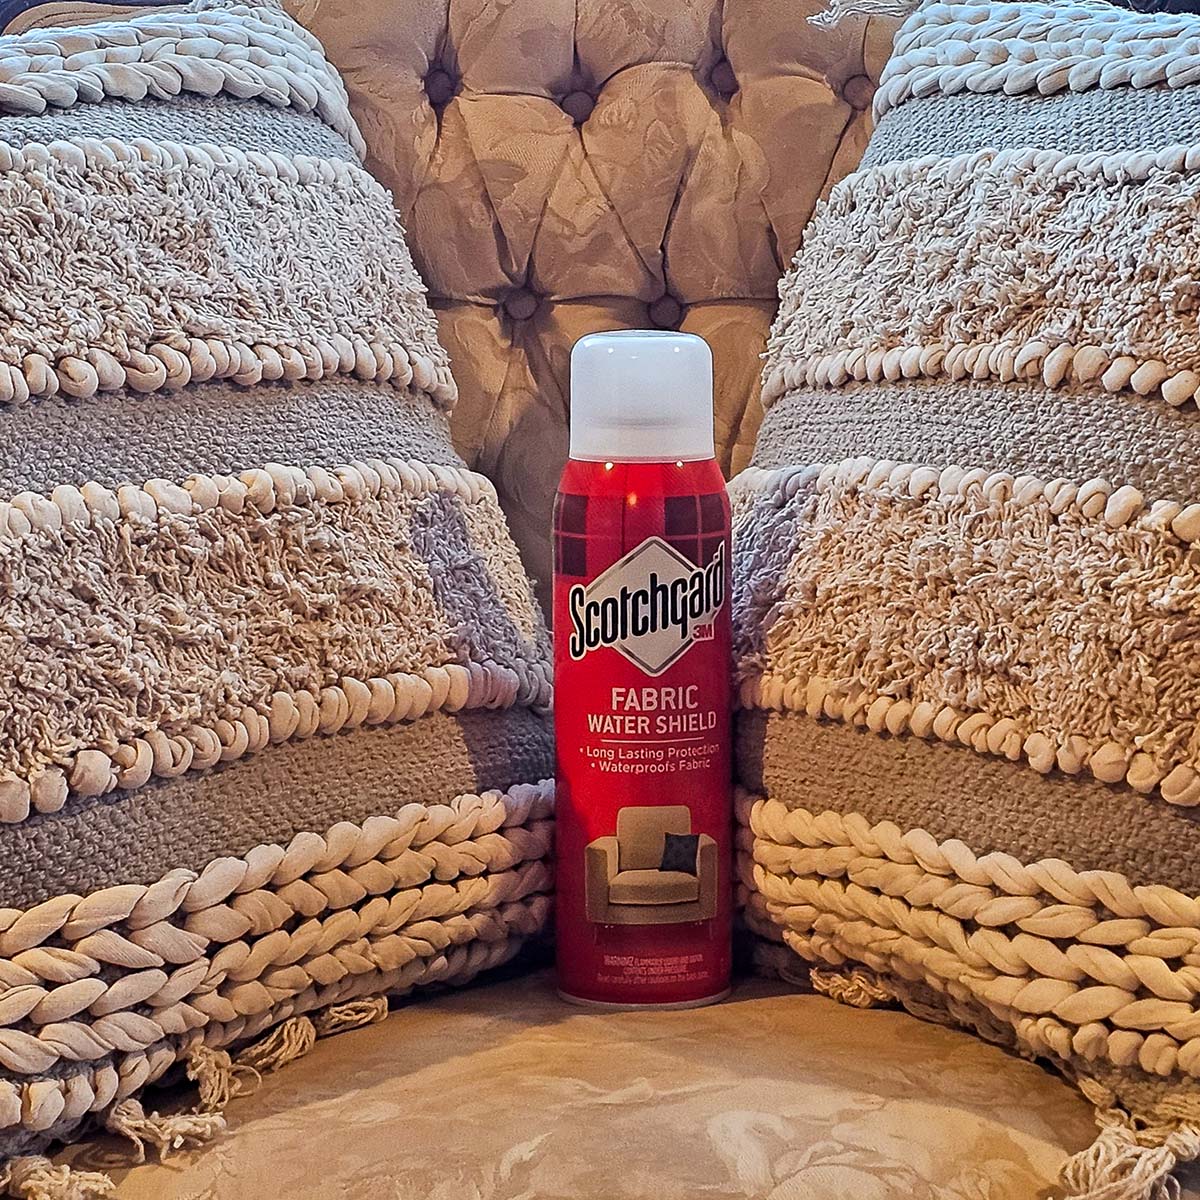 A can of Scotchgard fabric protector sitting on a couch between two throw pillows.